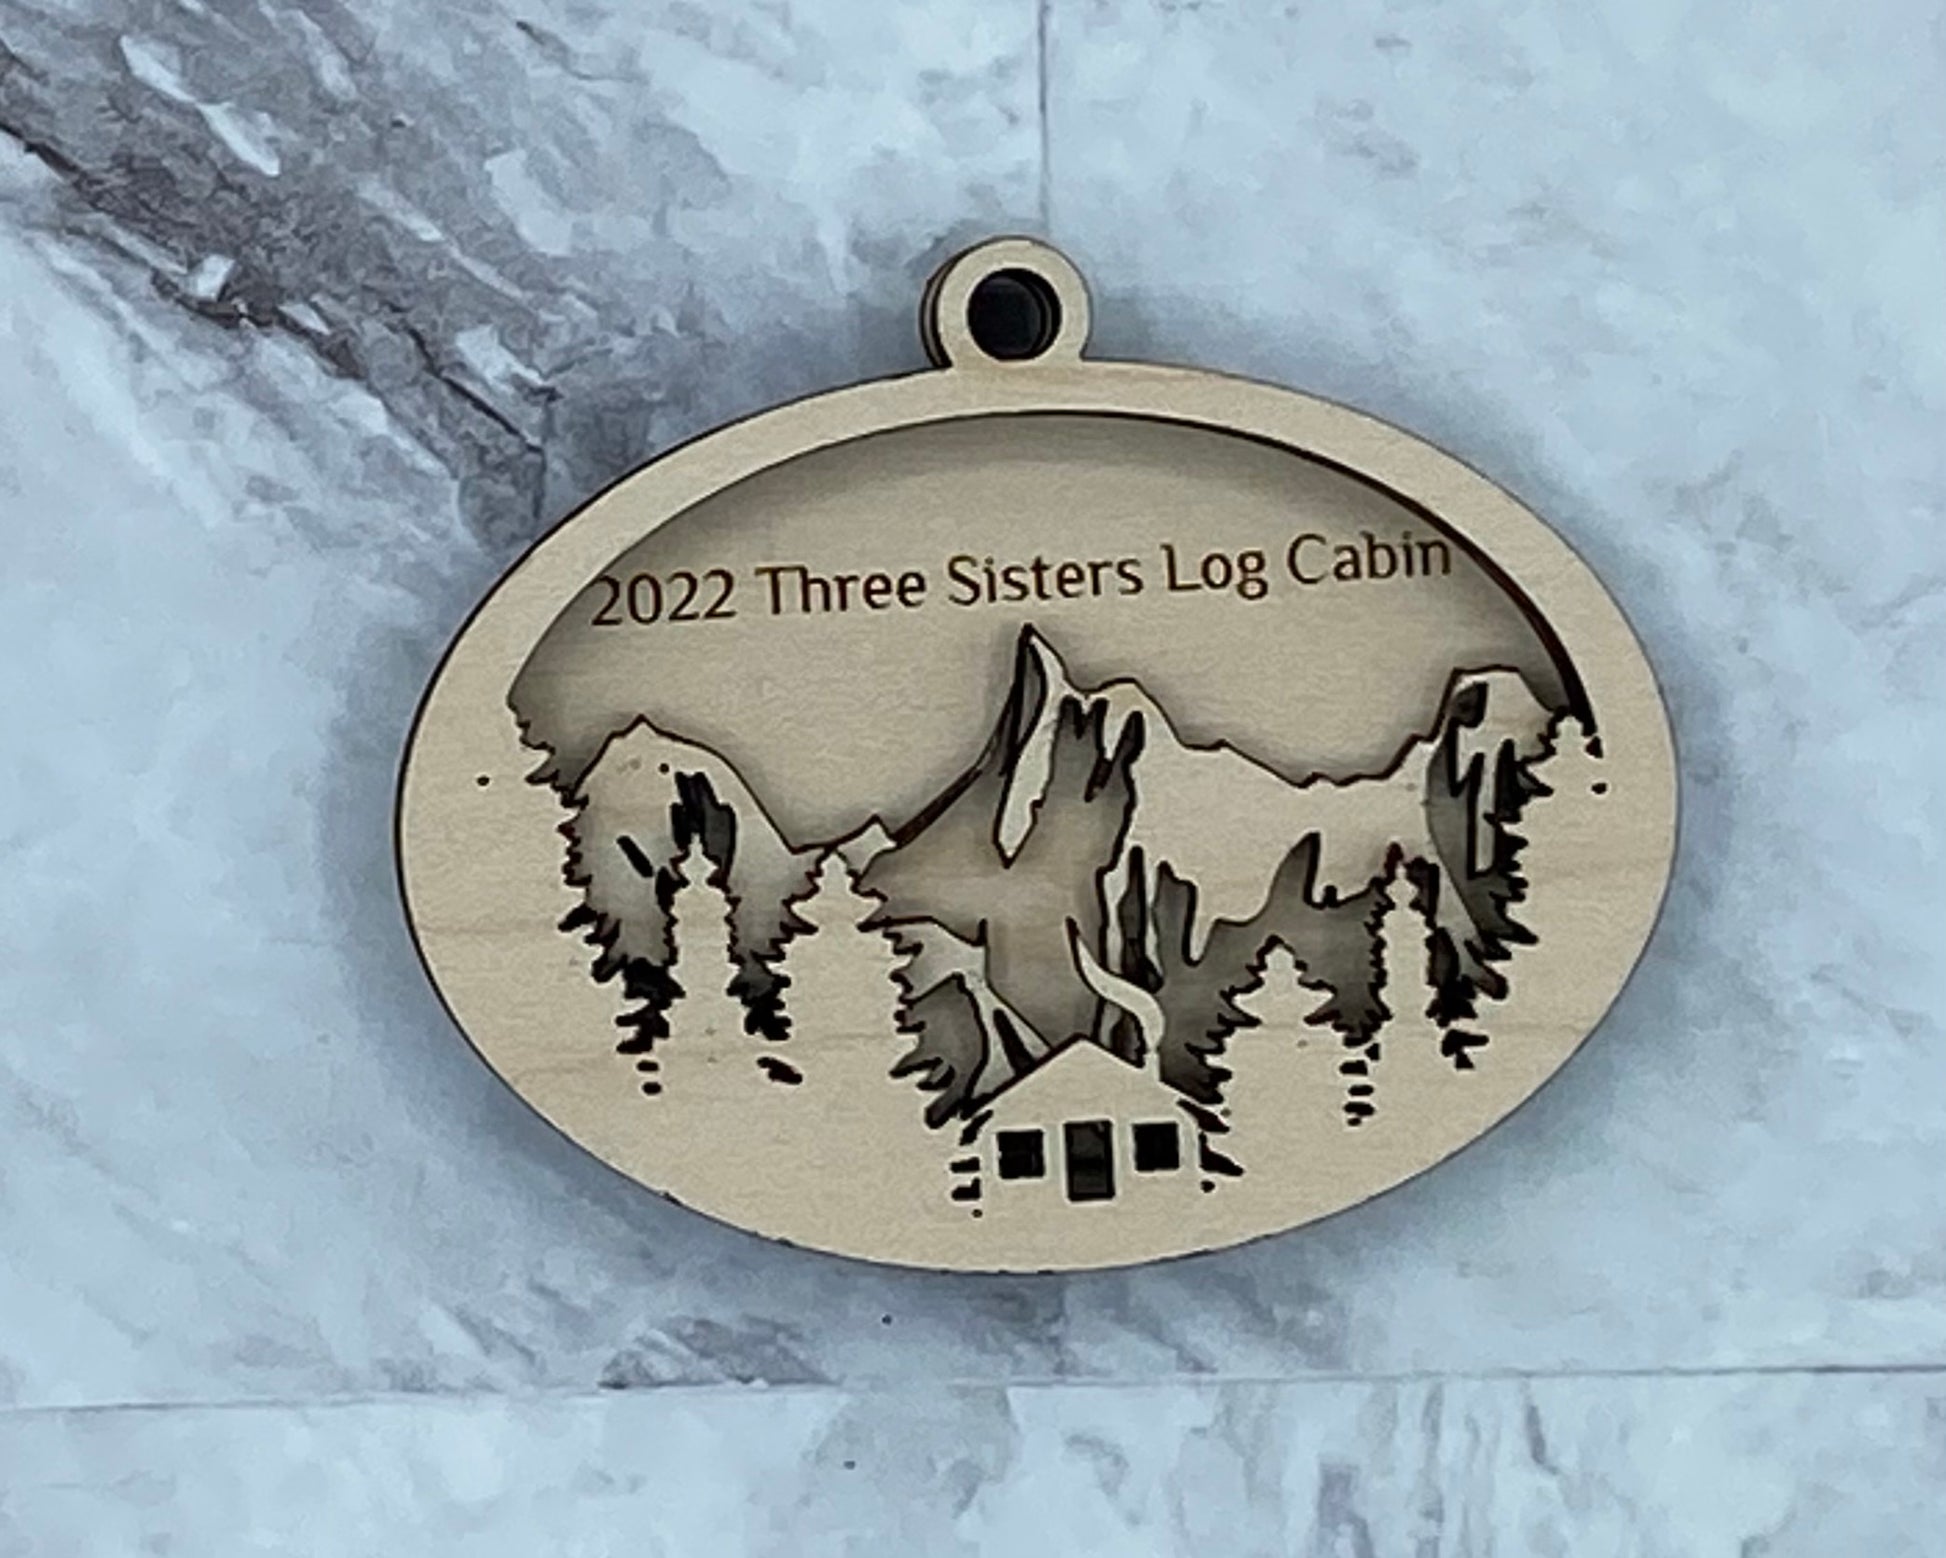 Customized Branded Airbnb VRBO STR Host Items Cabin in the Woods and Mountains Ornament